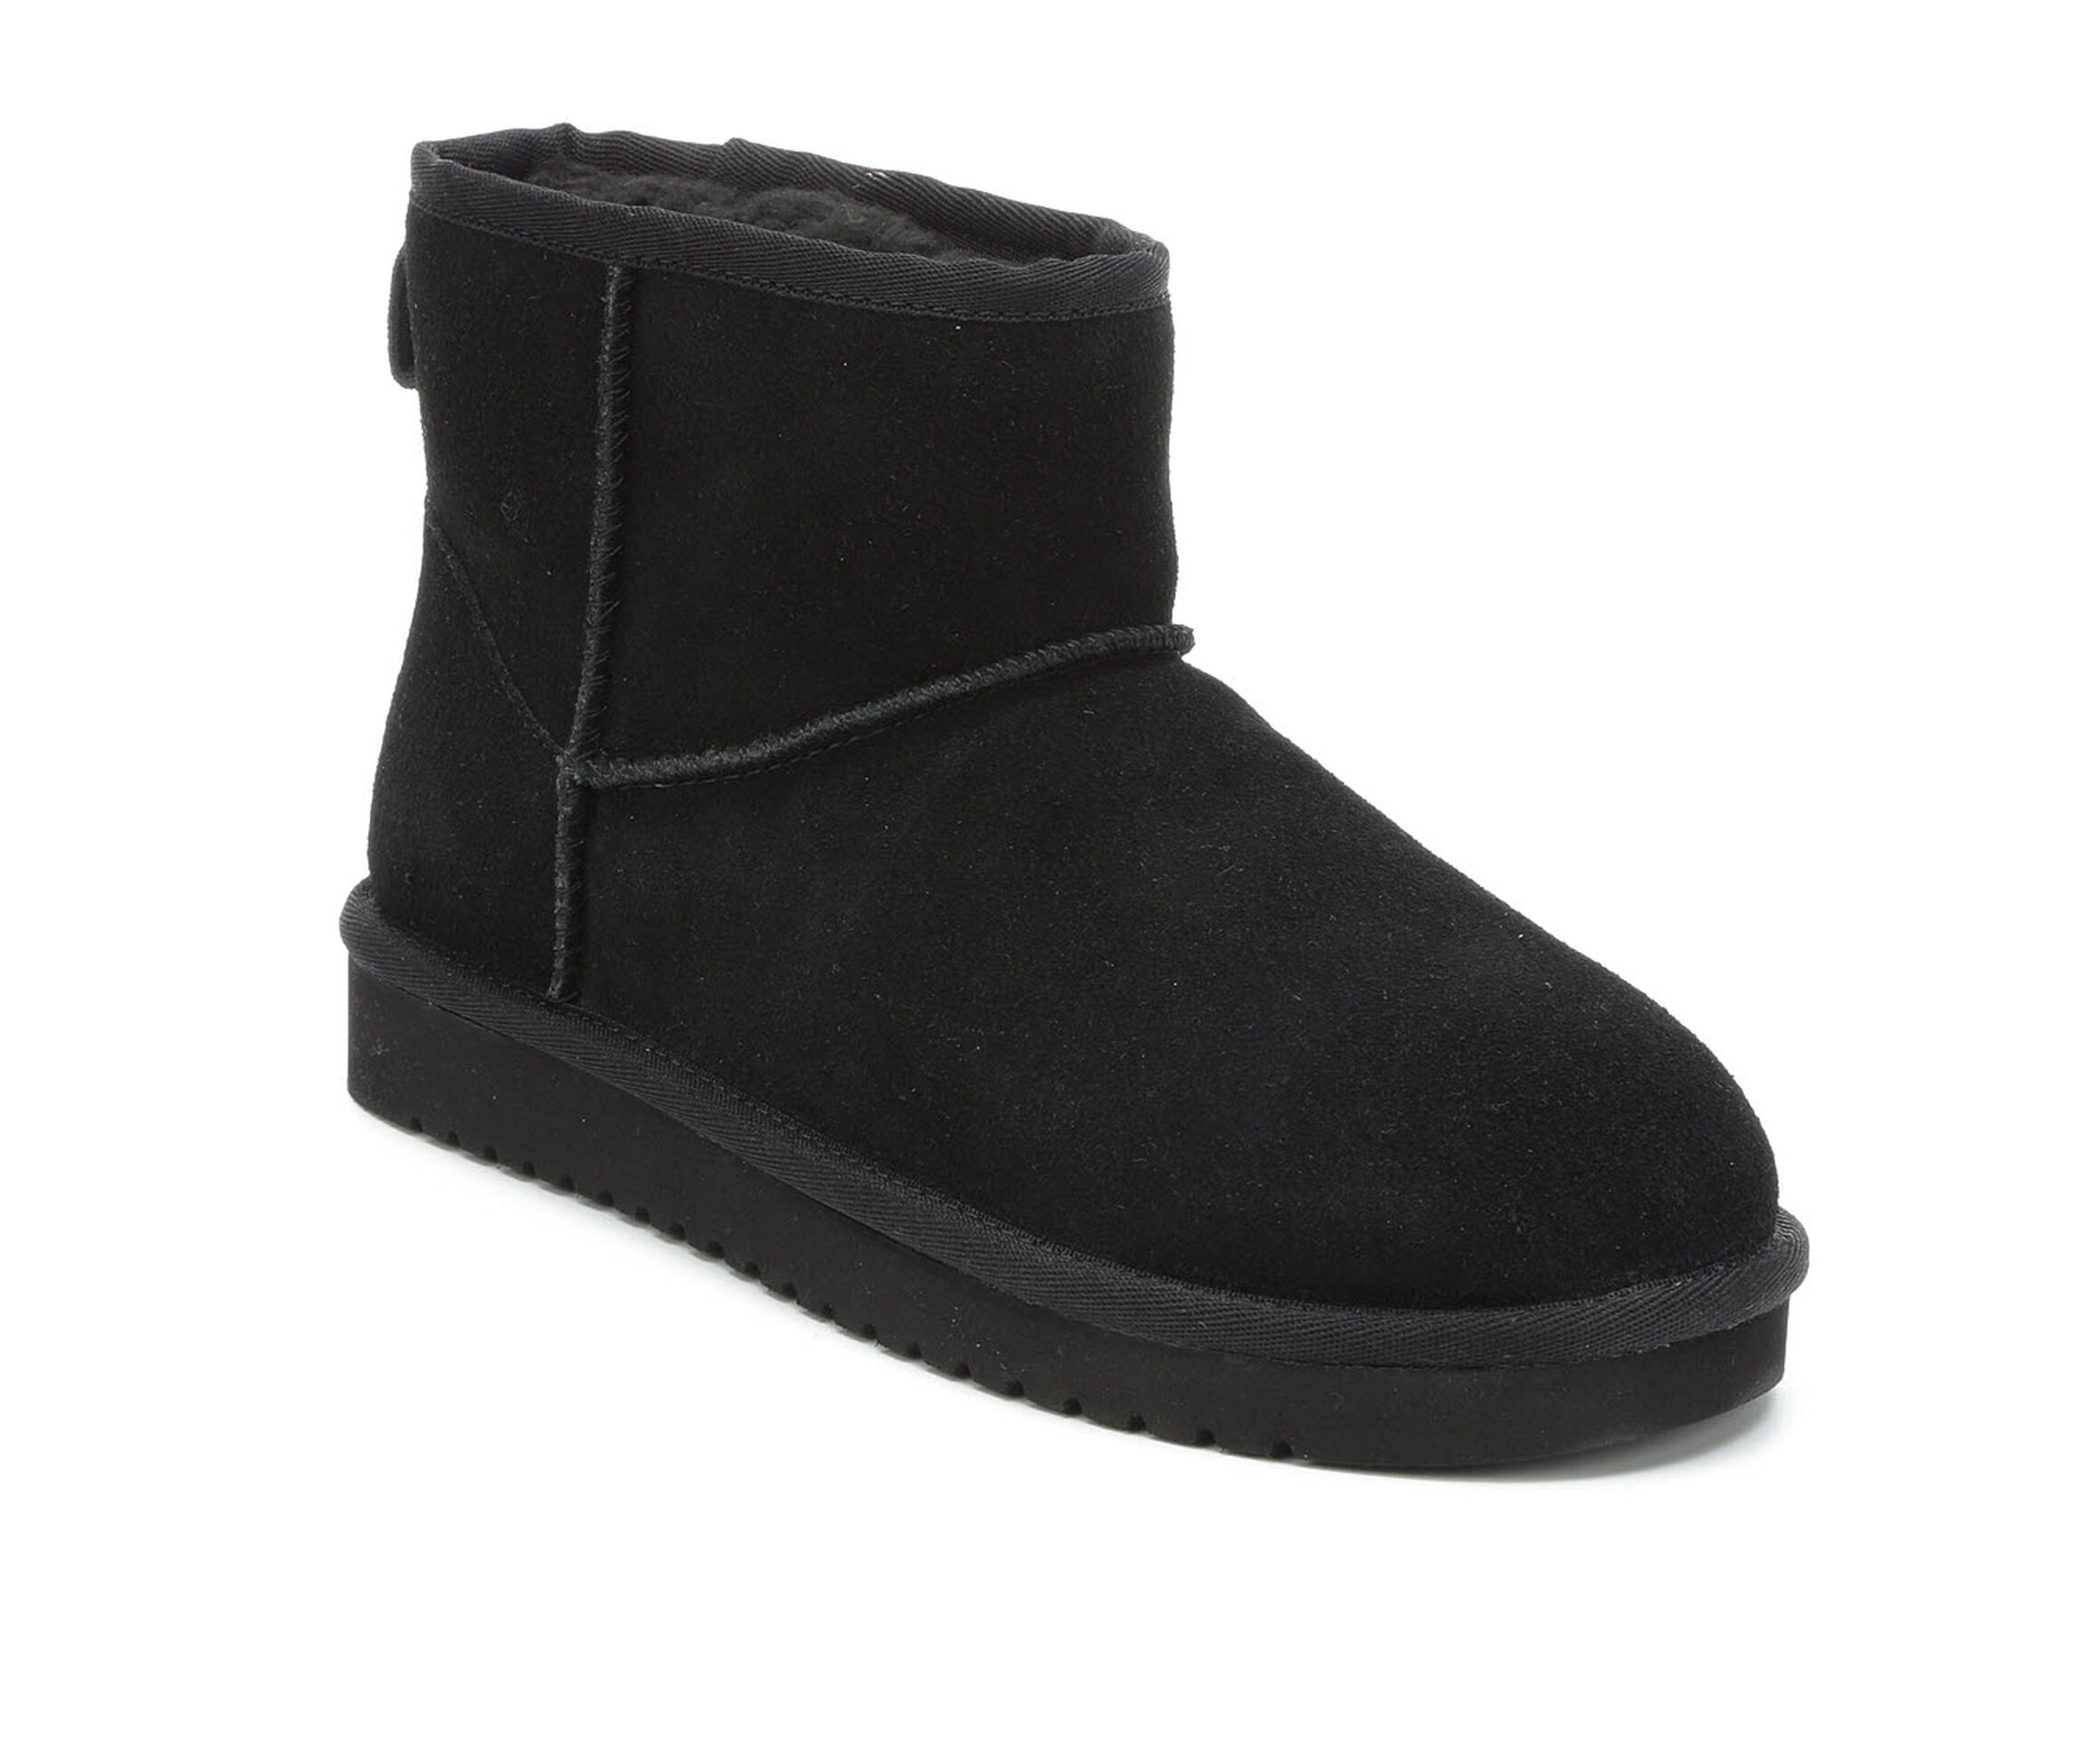 Koolaburra by UGG Boots and Slippers | Shoe Carnival